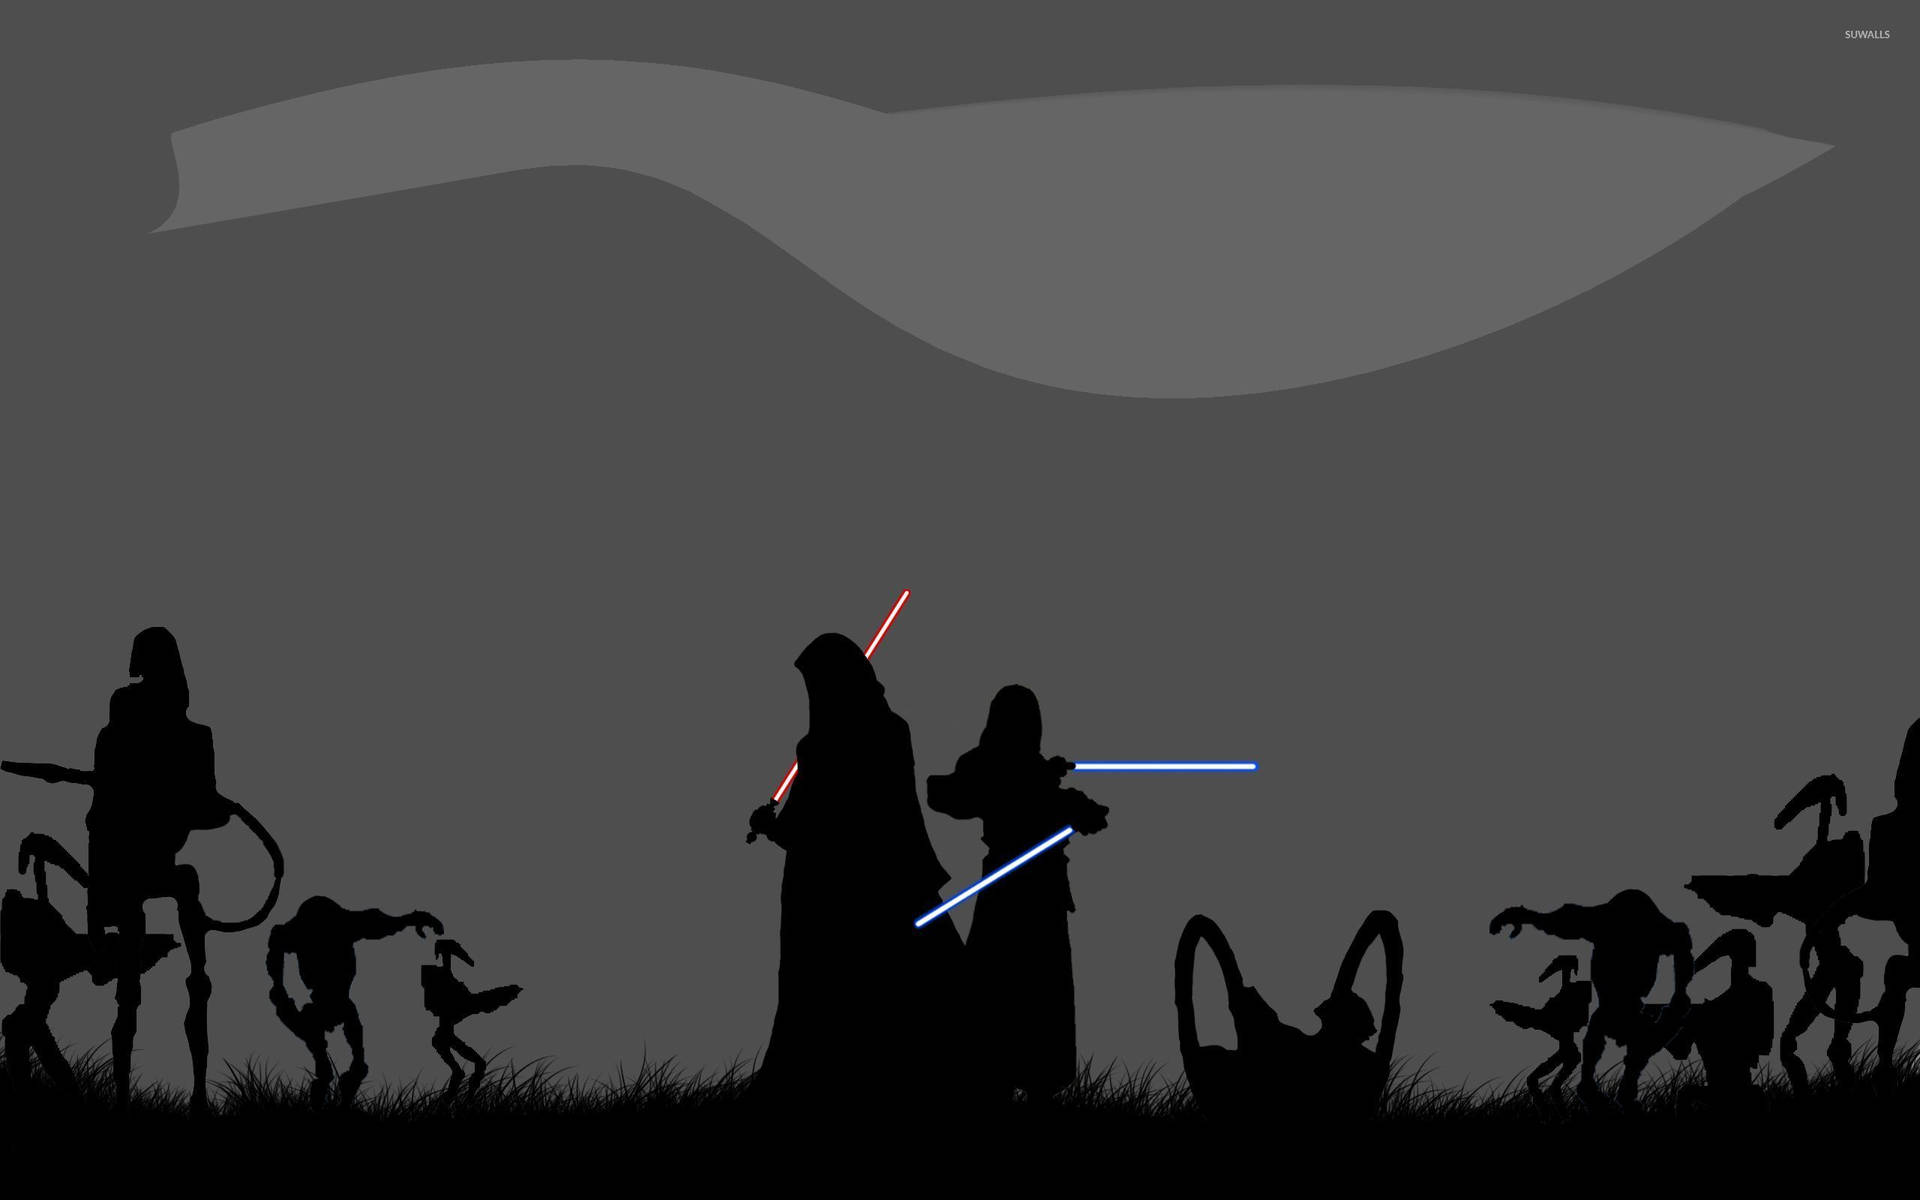 “The Force Is Strong” Wallpaper